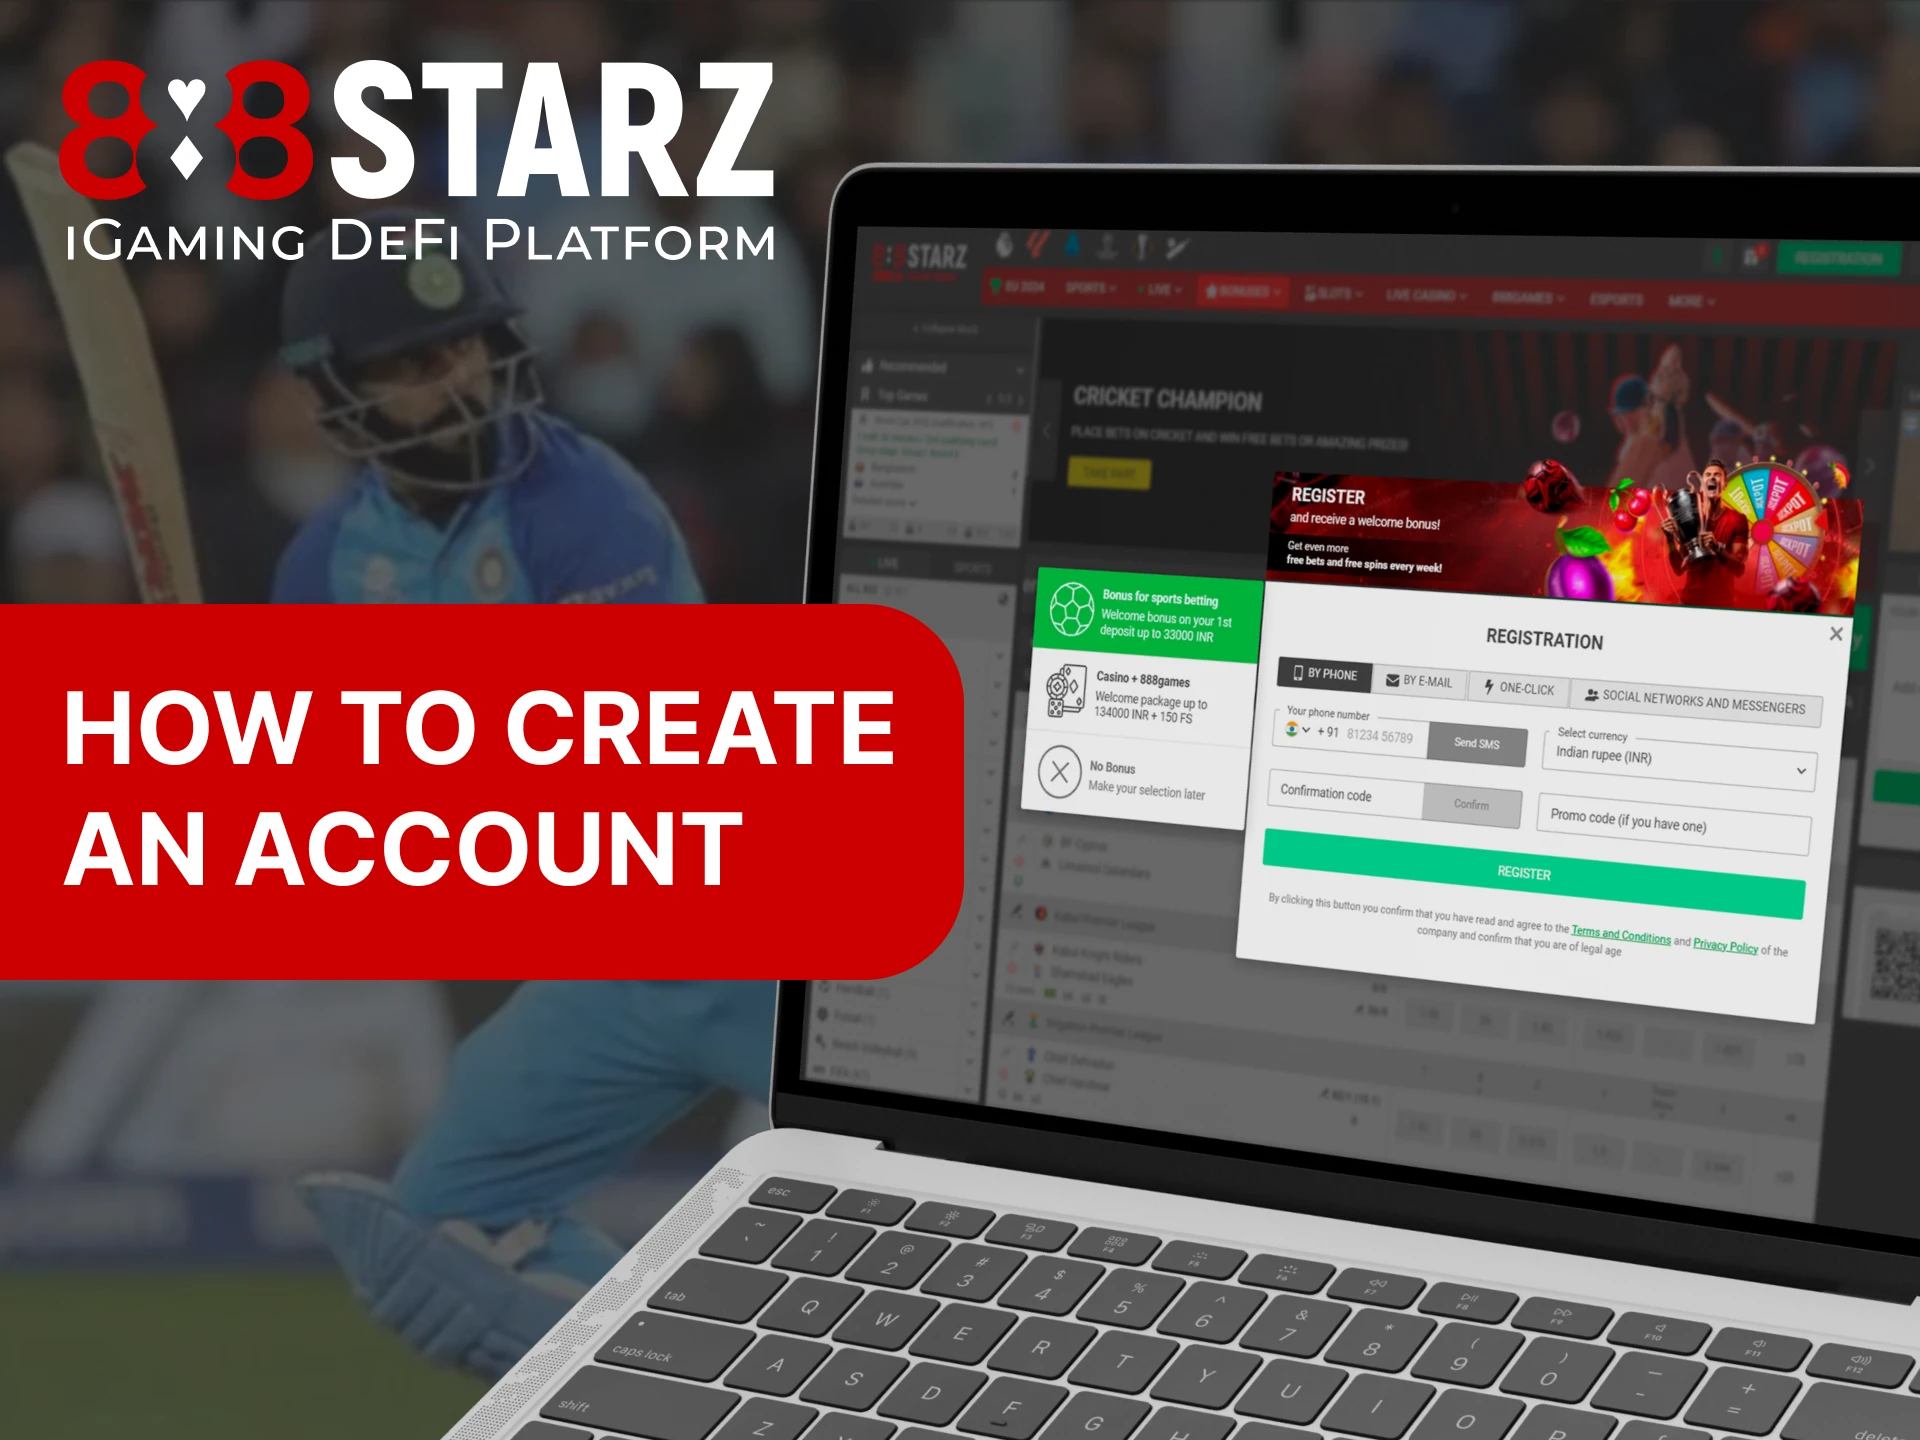 Create an 88Starz account using your favorite method.